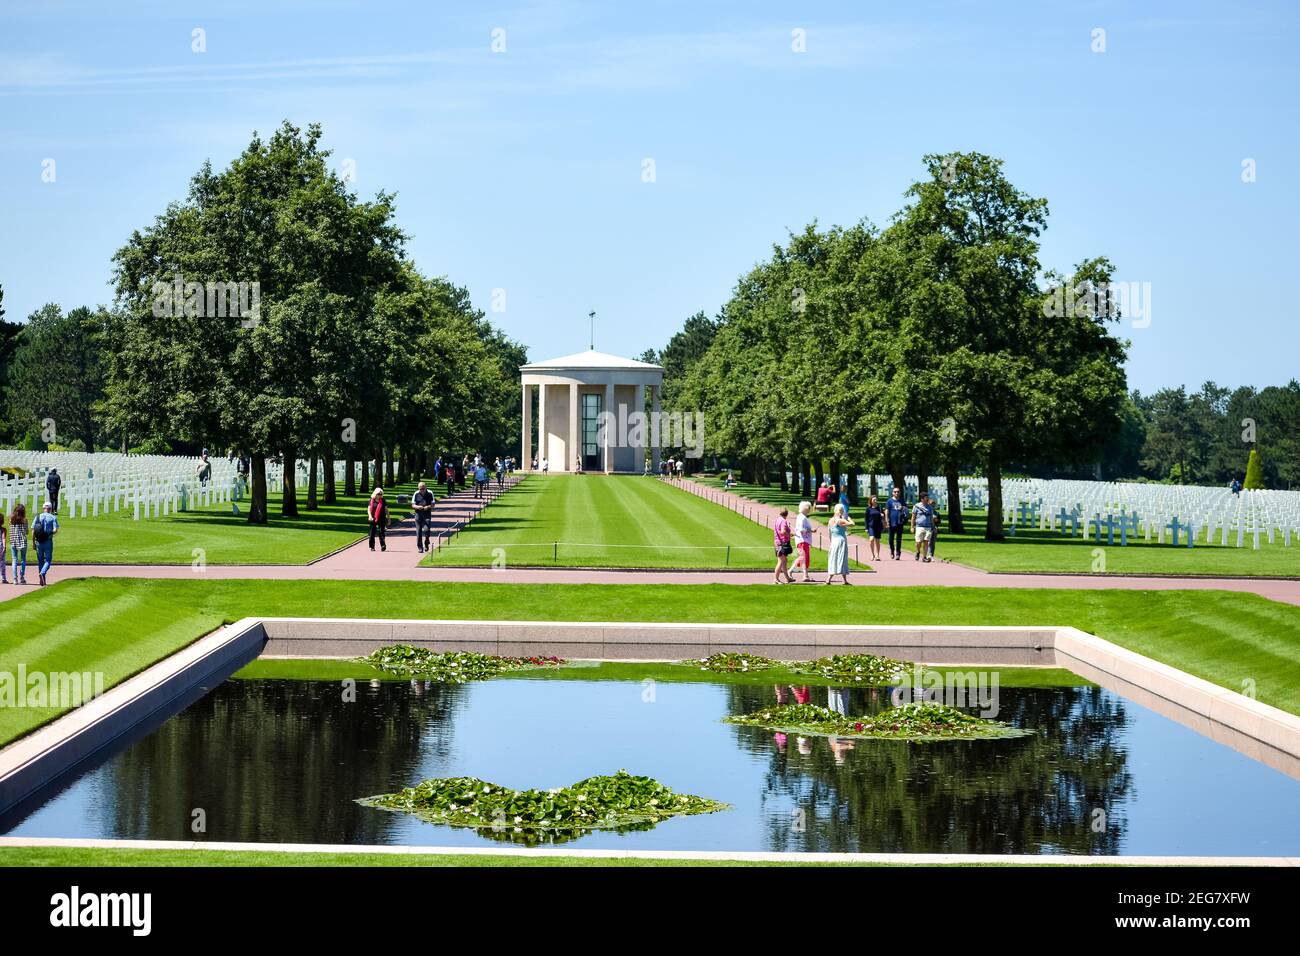 NORMANDY, FRANCE - July 5, 2017: Tourists visiting 'The Garden of the Missing' at the American Cemetery from the Battle of the Normandy Landings durin Stock Photo